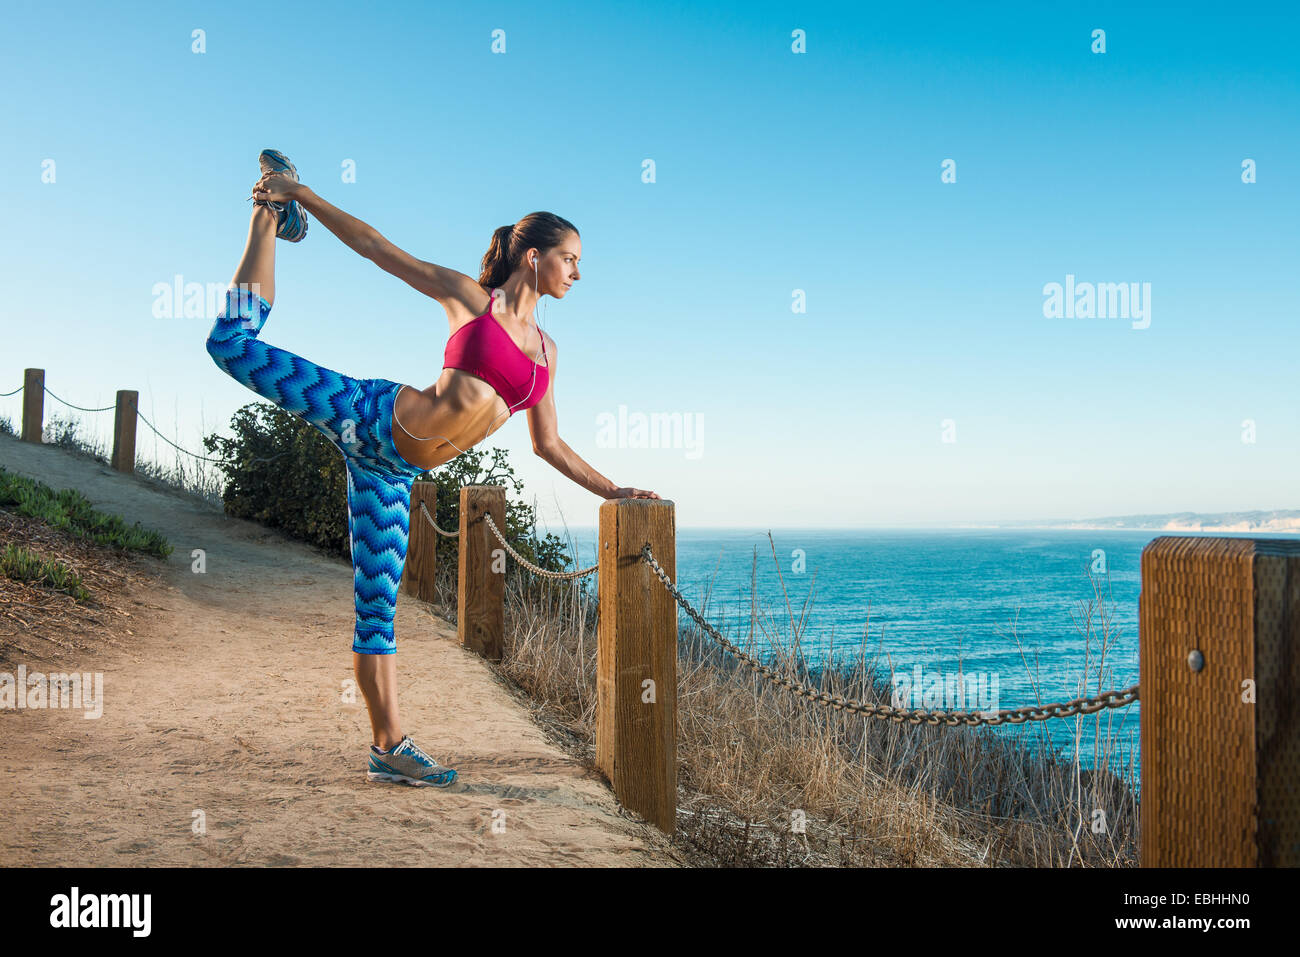 Young woman doing stretches on path by sea Stock Photo